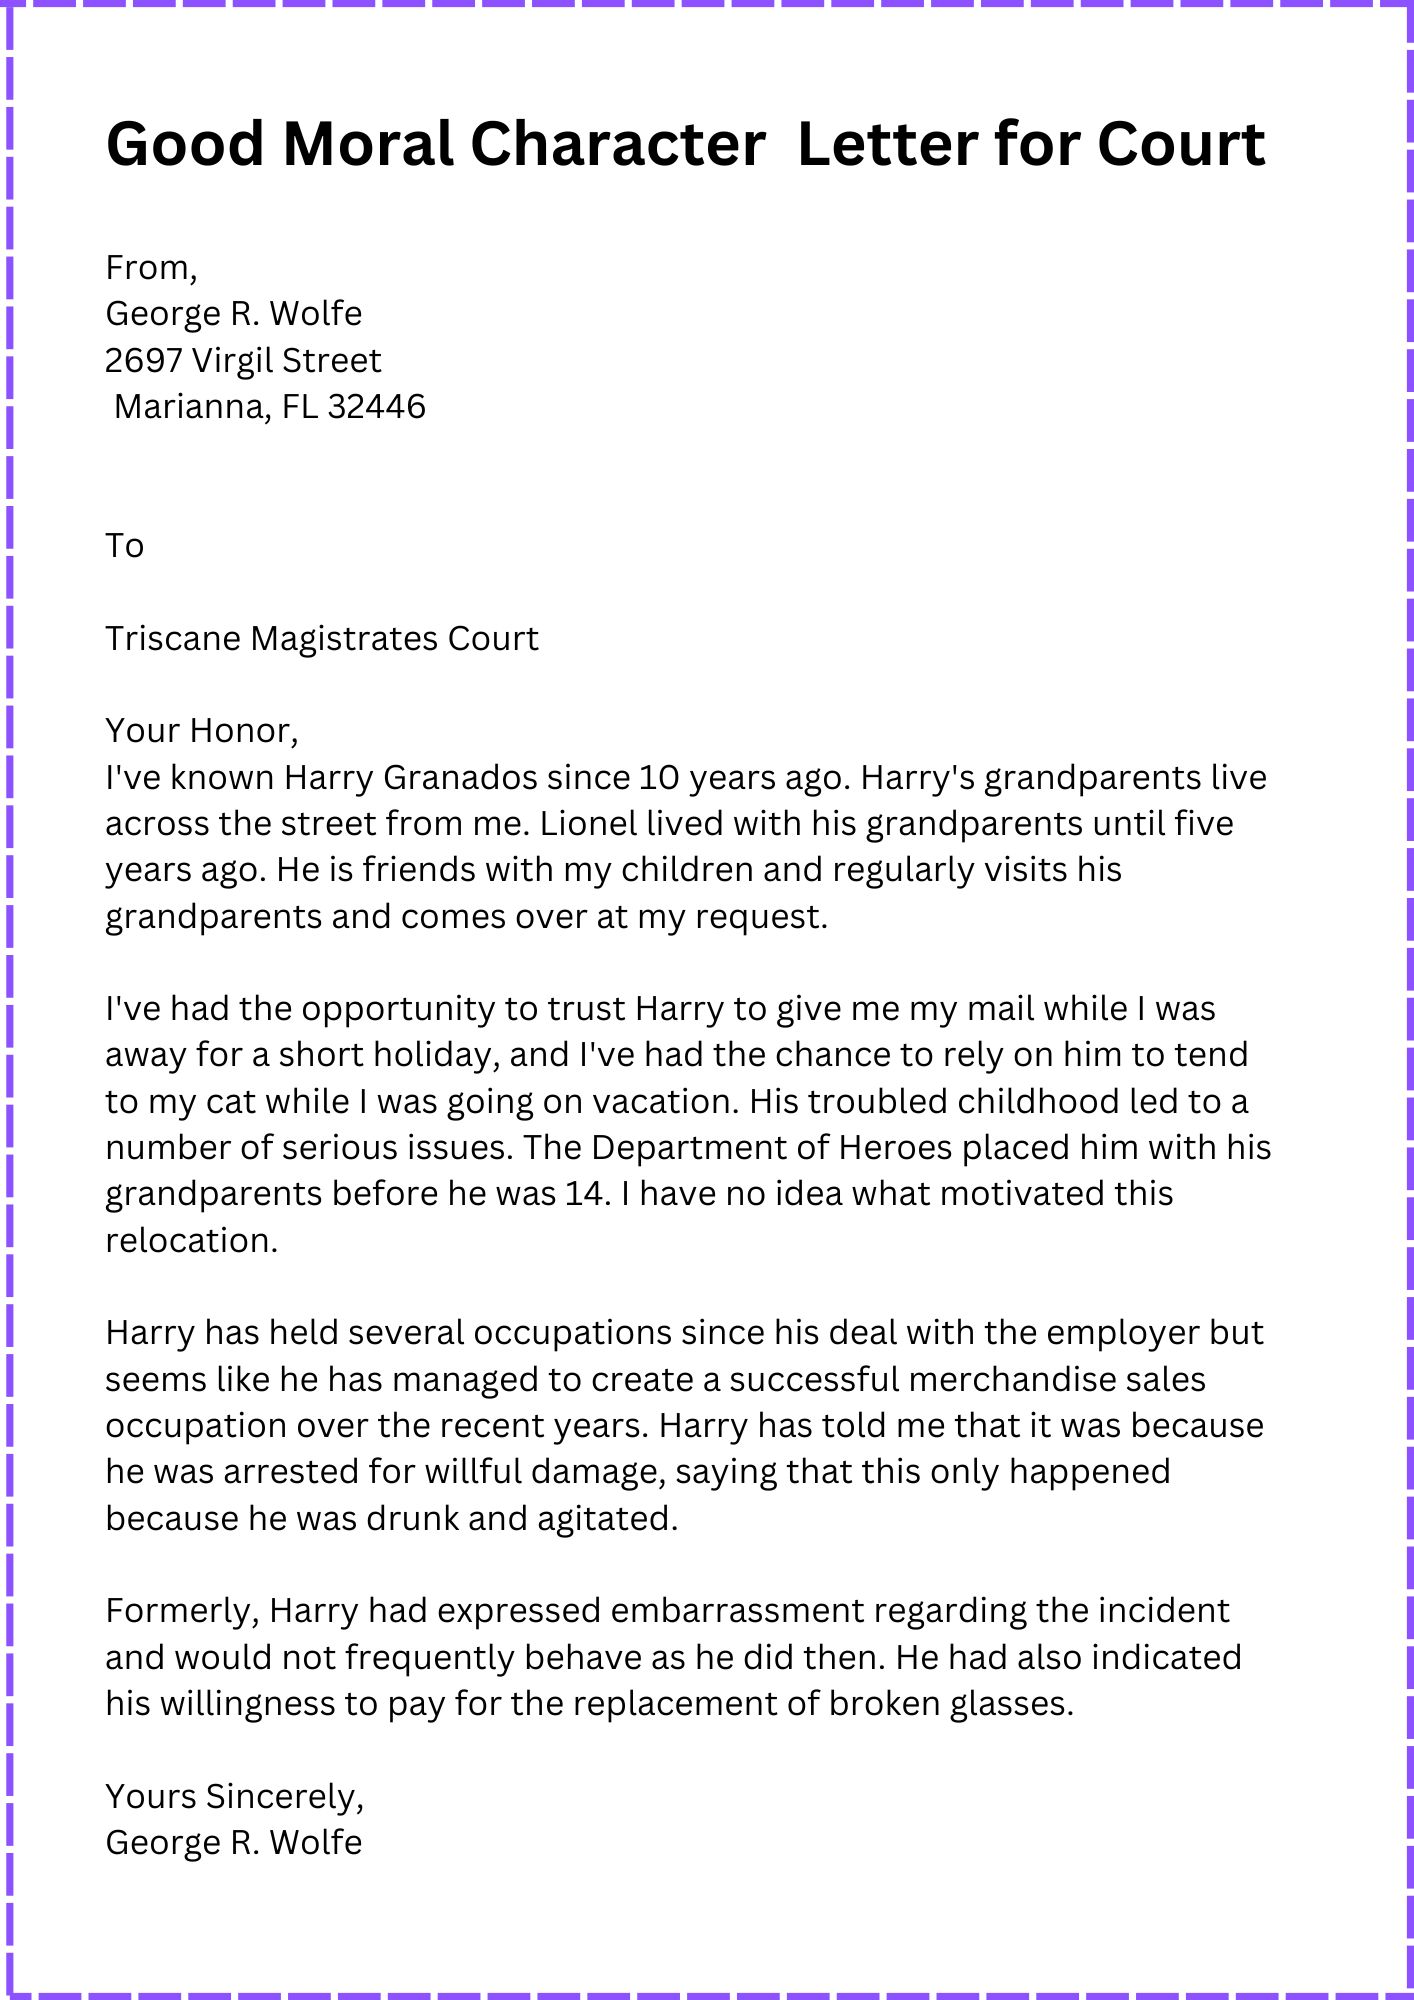 Good Moral Character - Character Letter for Court